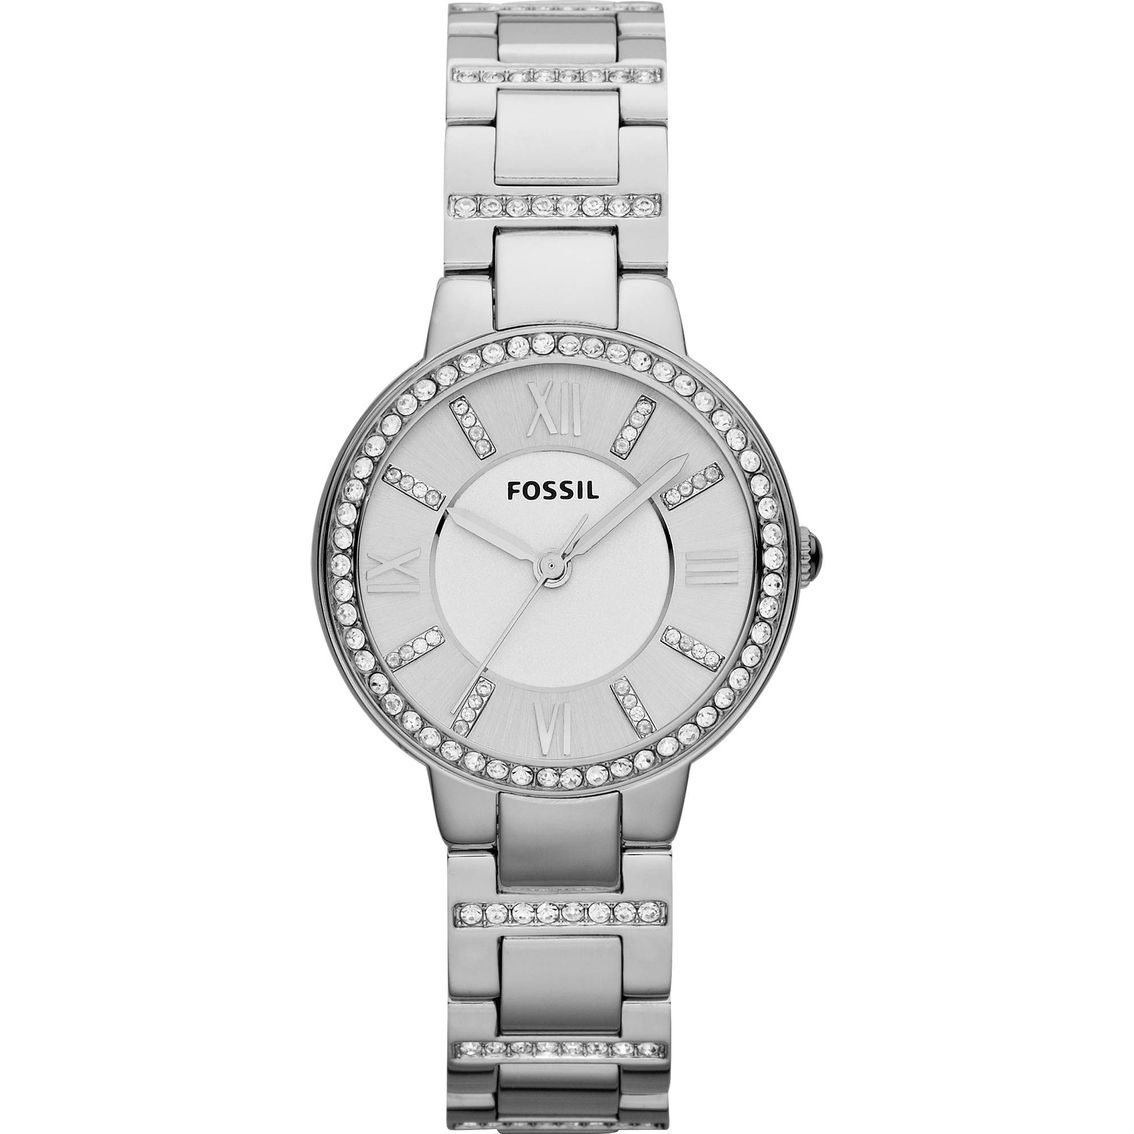 Fossil Women's Virginia Stainless Steel Watch With Crystal Accents ...